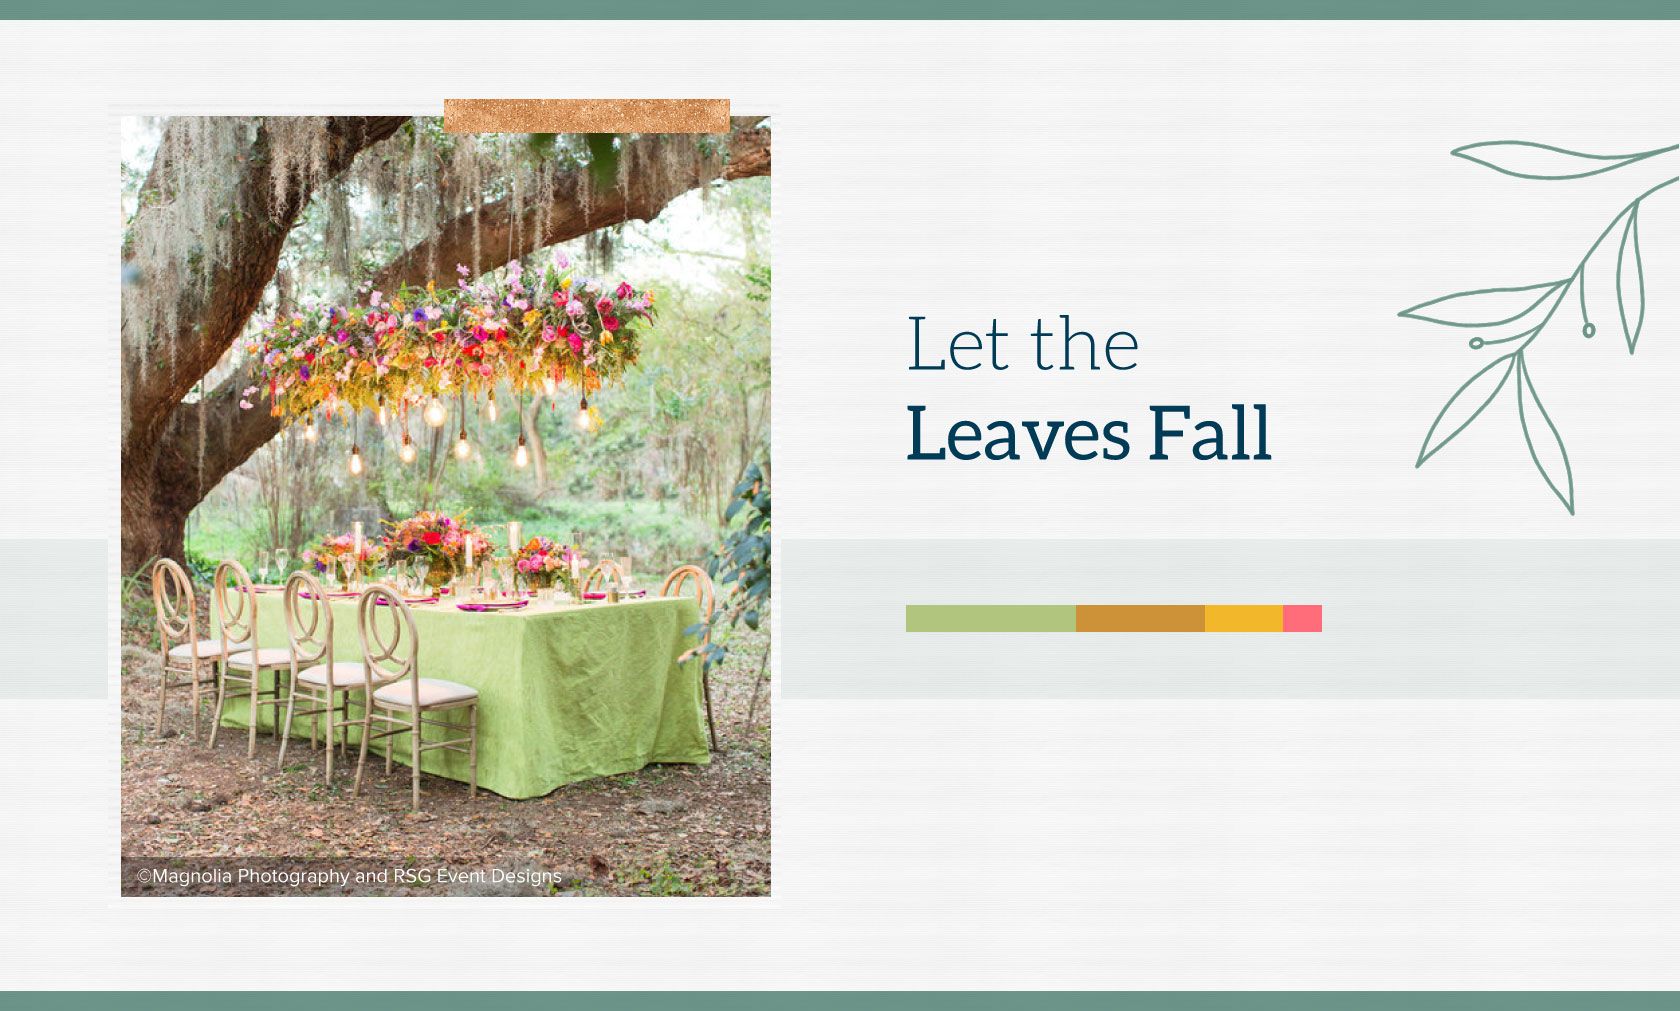 Let the Leaves Fall